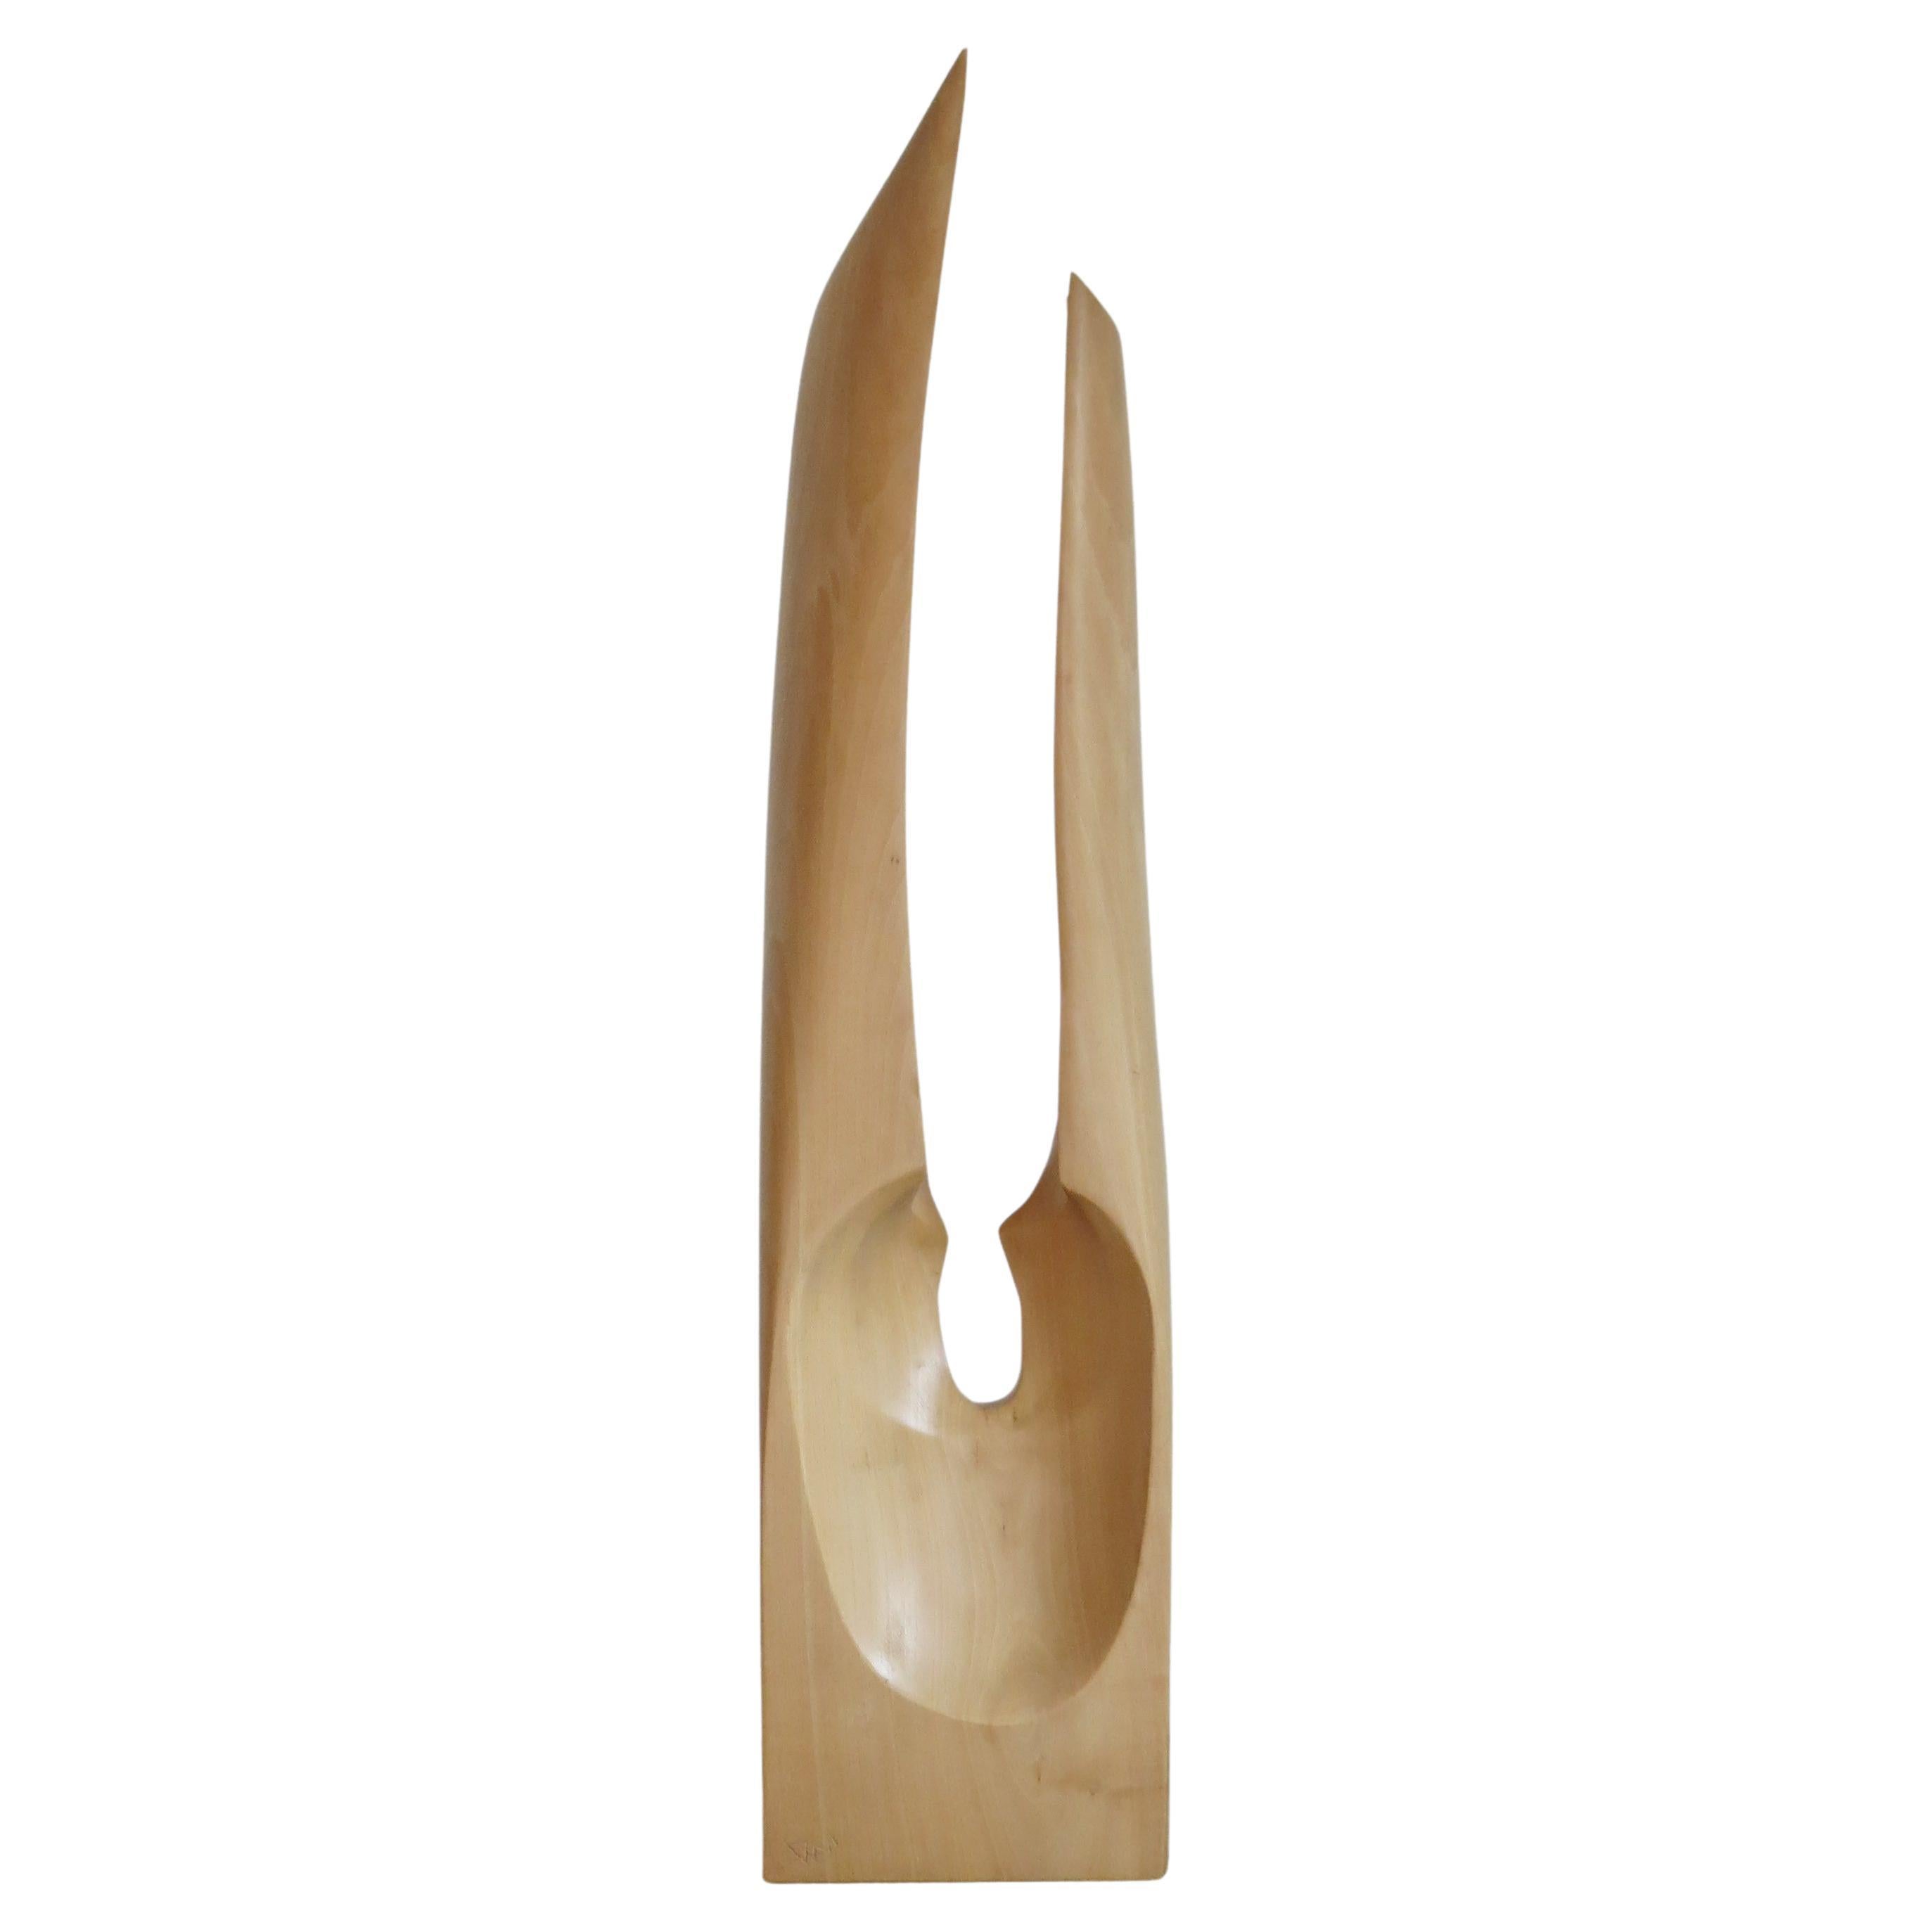 Wonderful hand crafted wooden sculpture dating from the 1970s. Made from solid Lime, beautifully hand carved, with a Barbara Hepworth influence. 
In good vintage condition, the colour of the wood has warmed and mellowed over time. 
Signed PKW